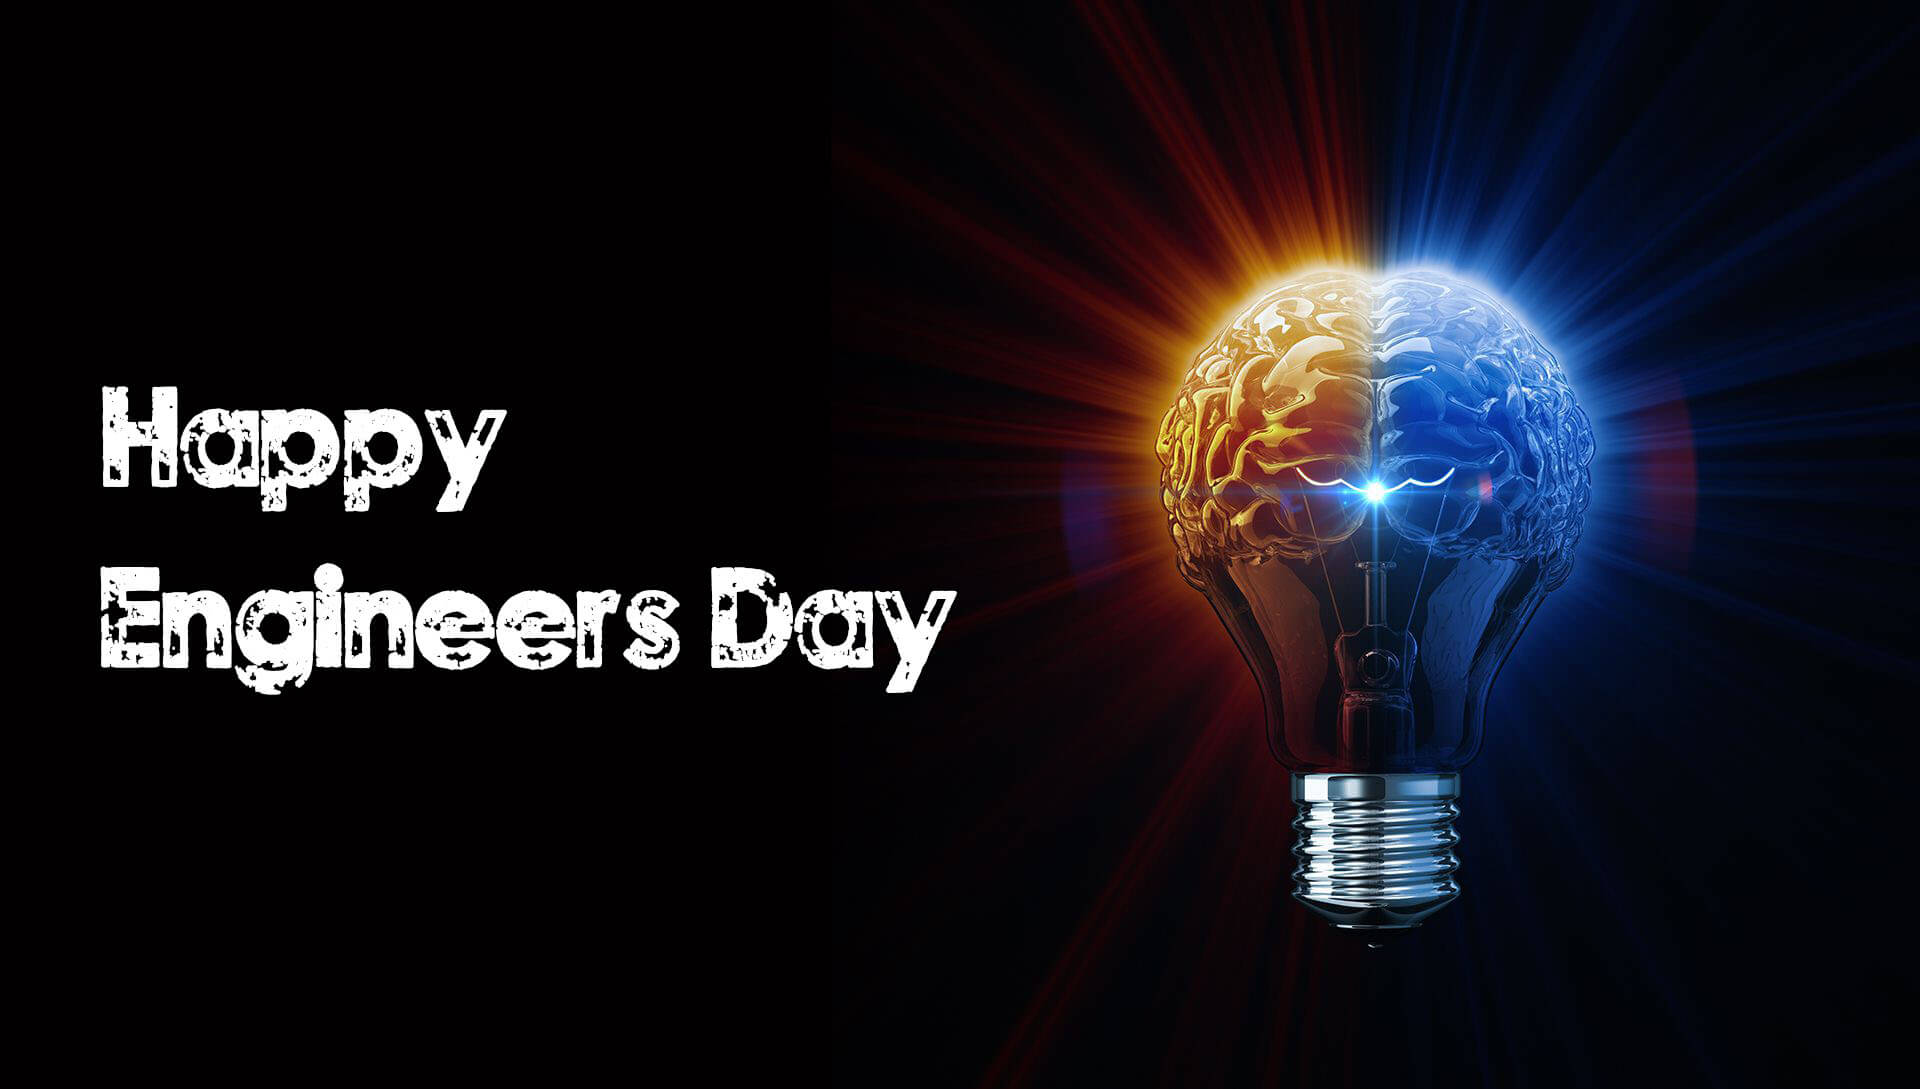 Happy Engineers Day Wishes Electrical .hdwallpaperfreedownload.com